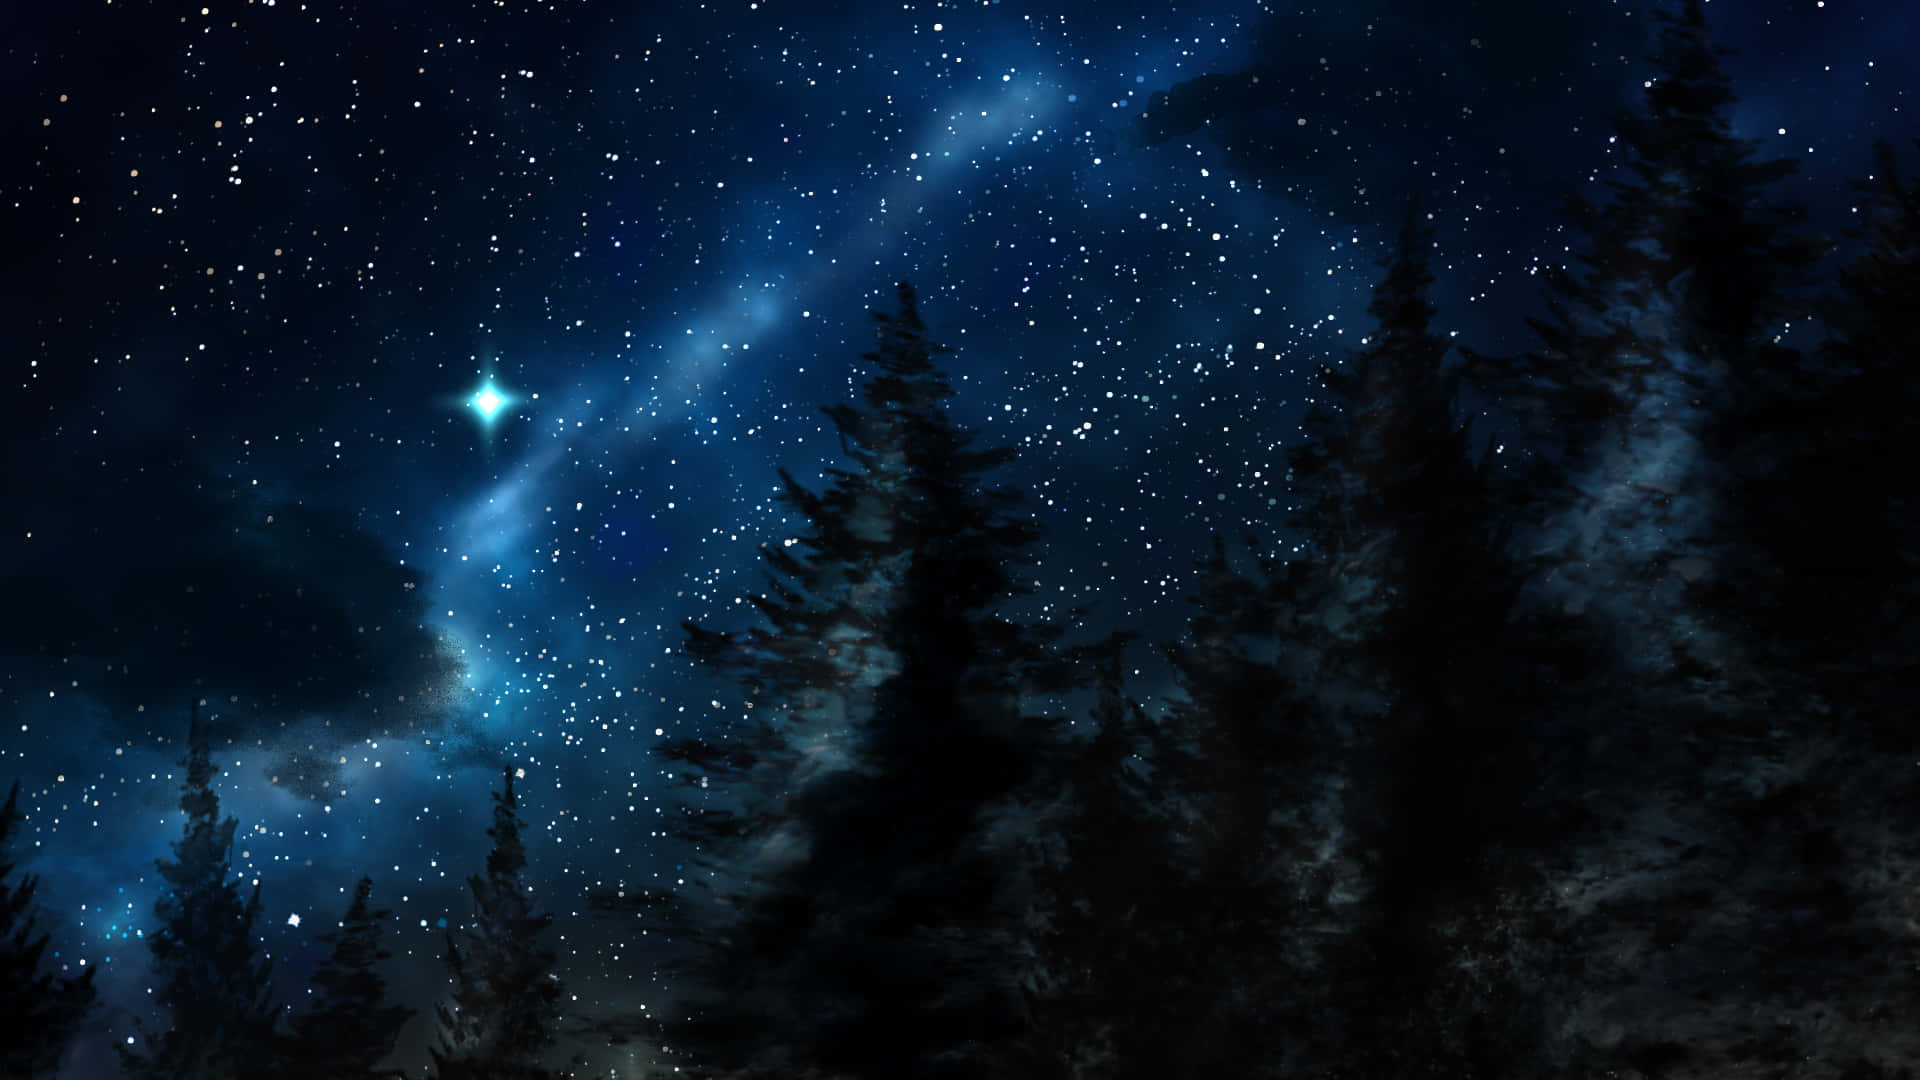 Enter a world of enchantment with a starry night sky